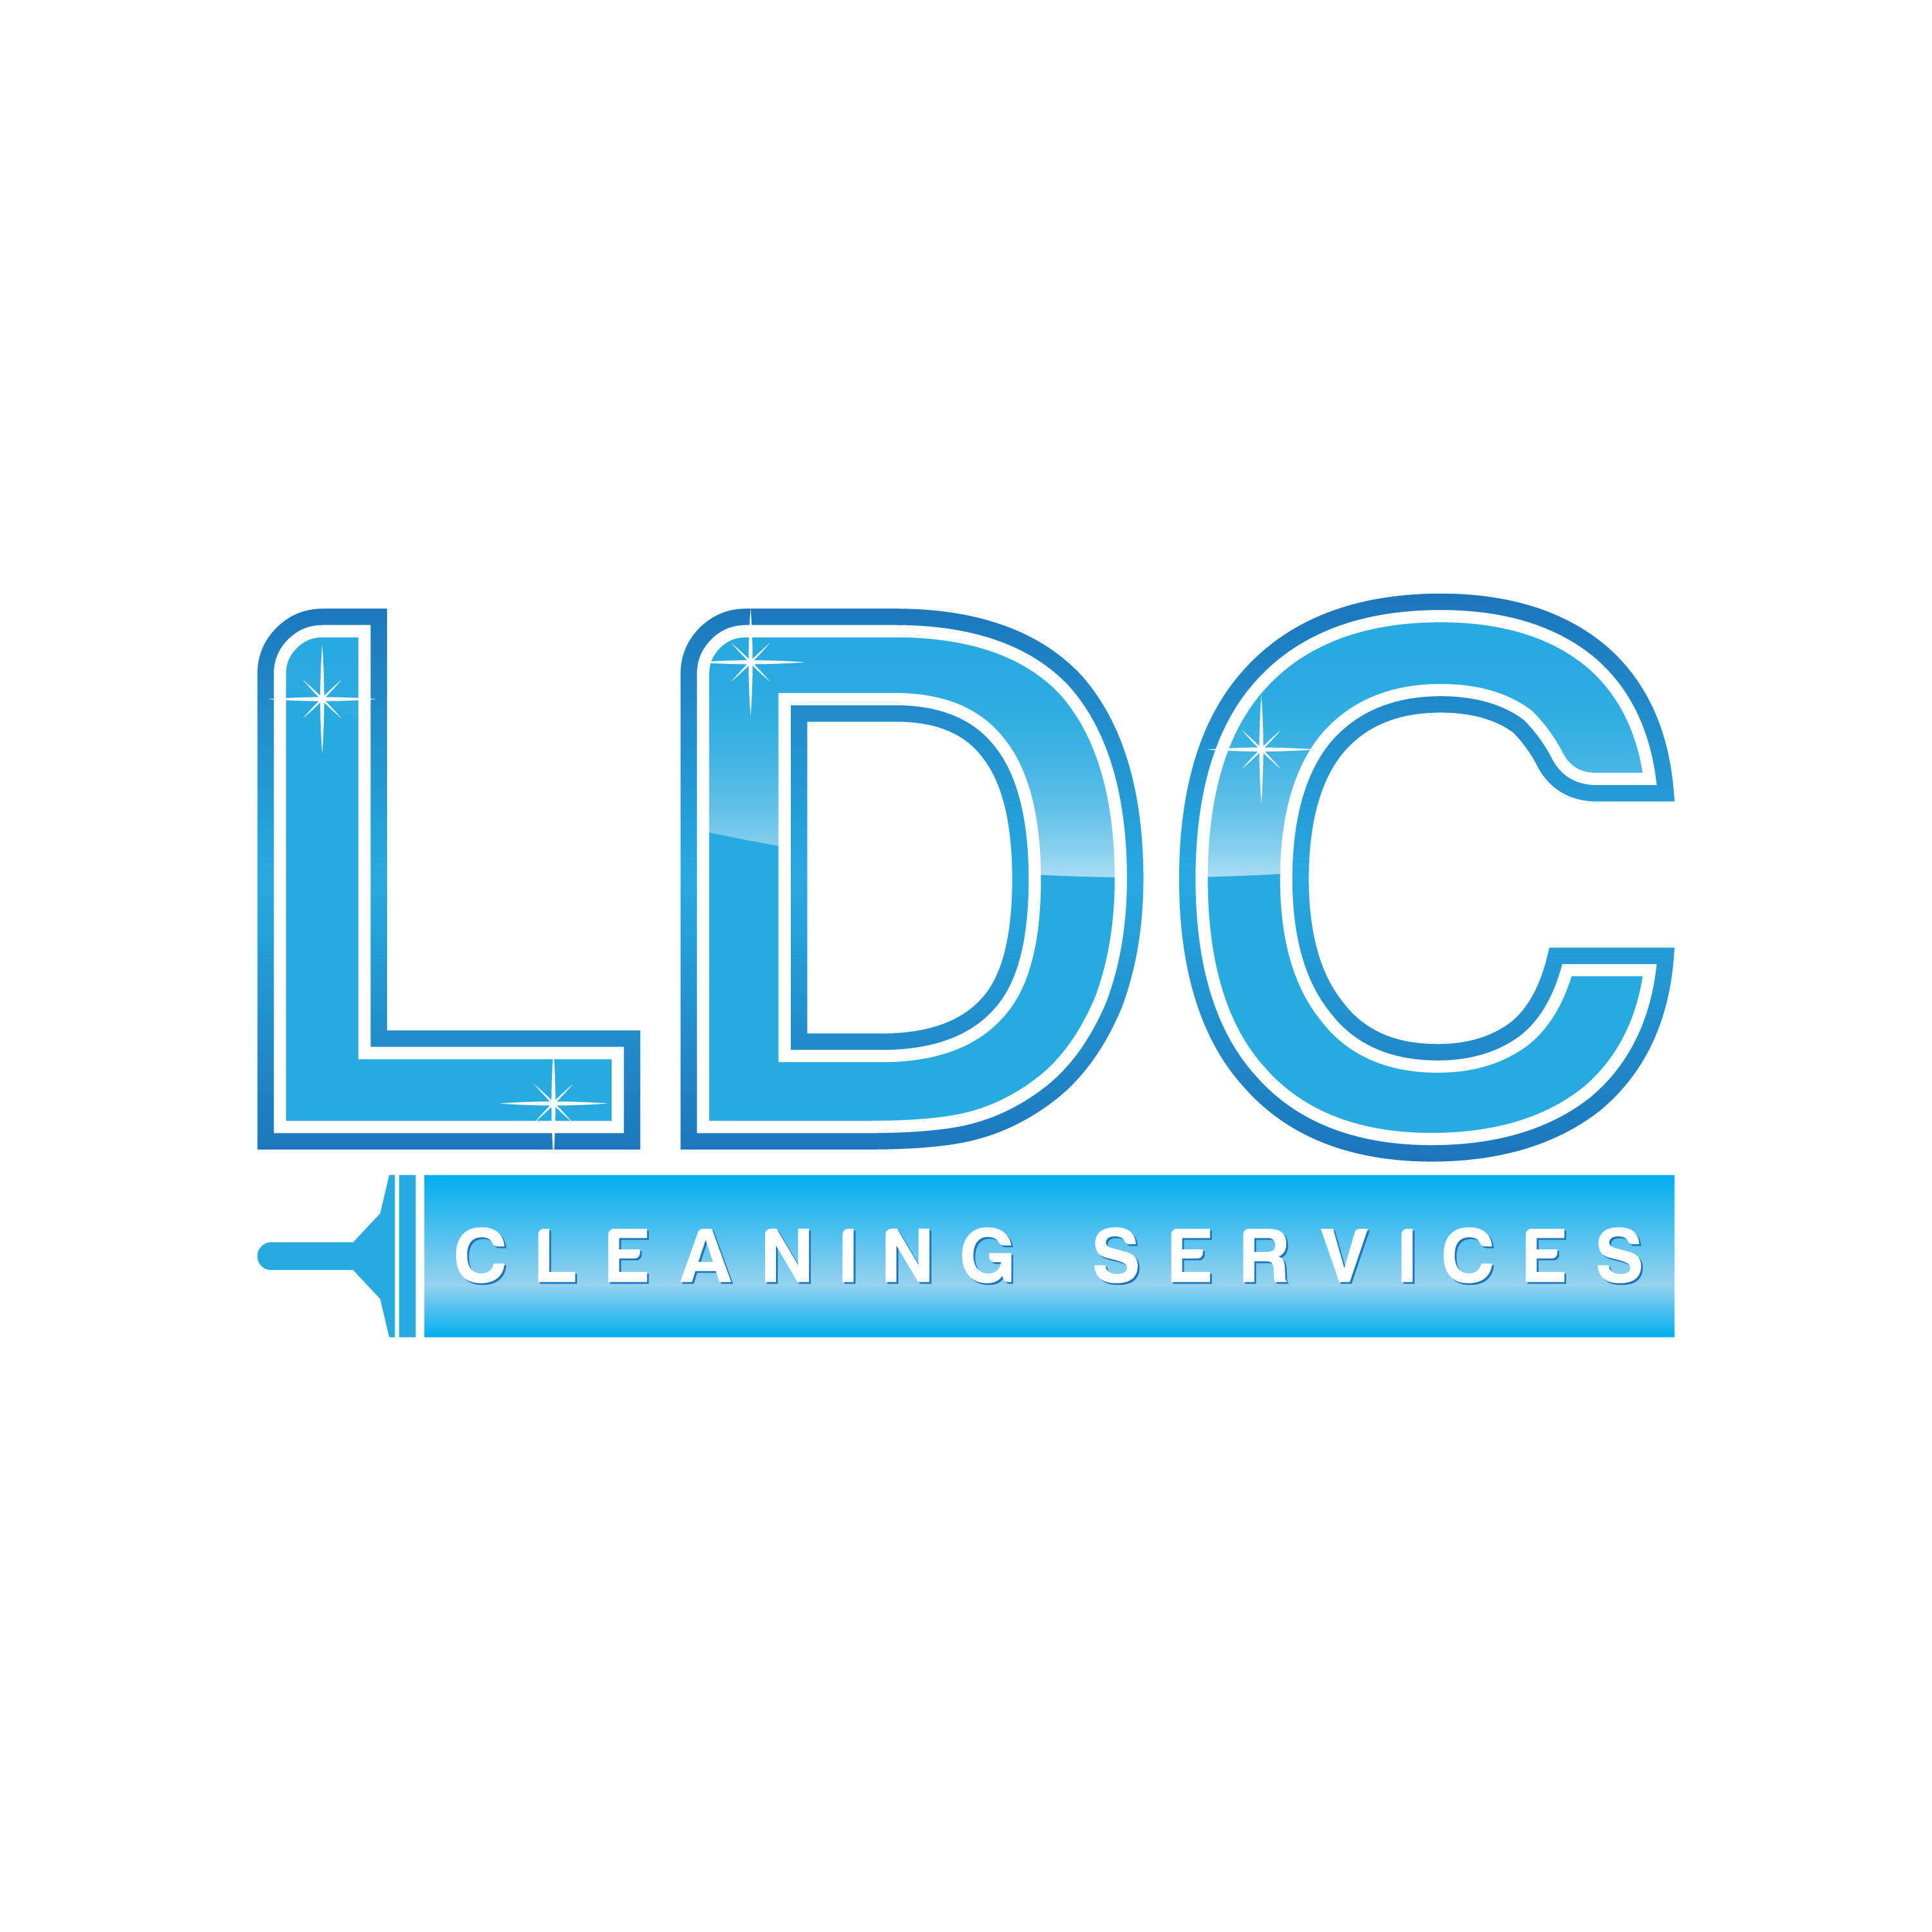 LDC Cleaning Services